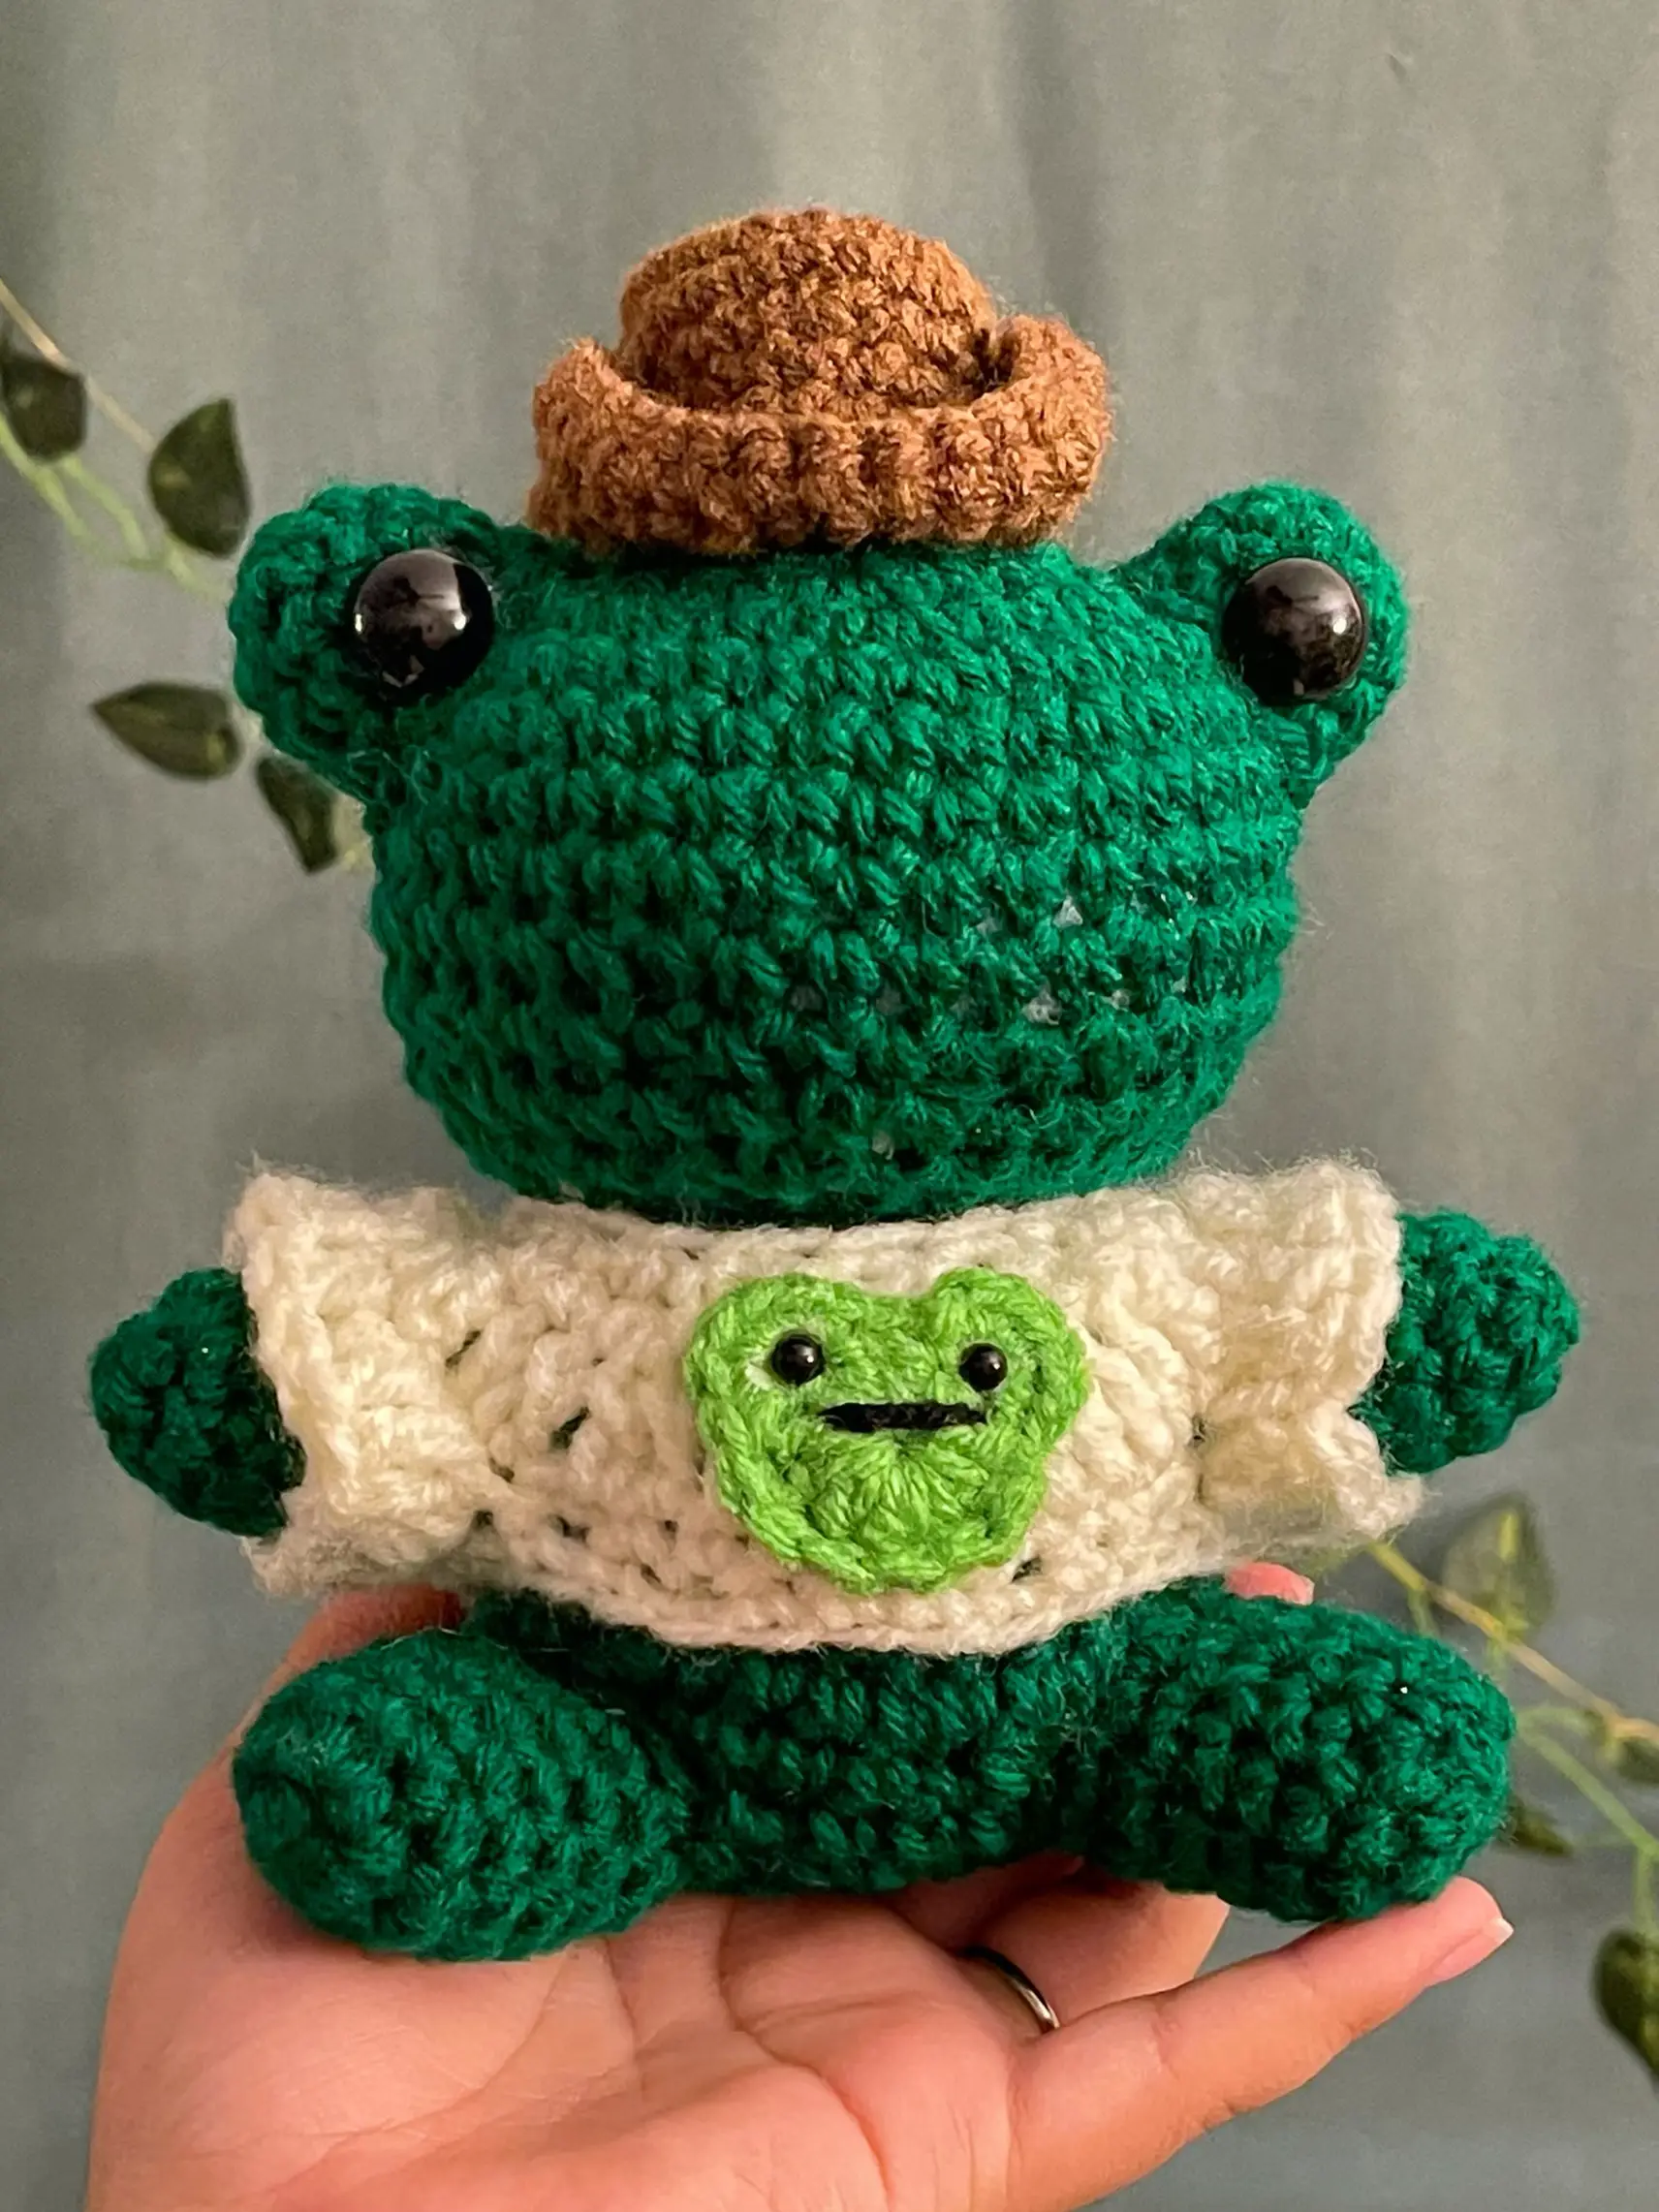 Crochet frog 🐸, Gallery posted by Camiss Crochet